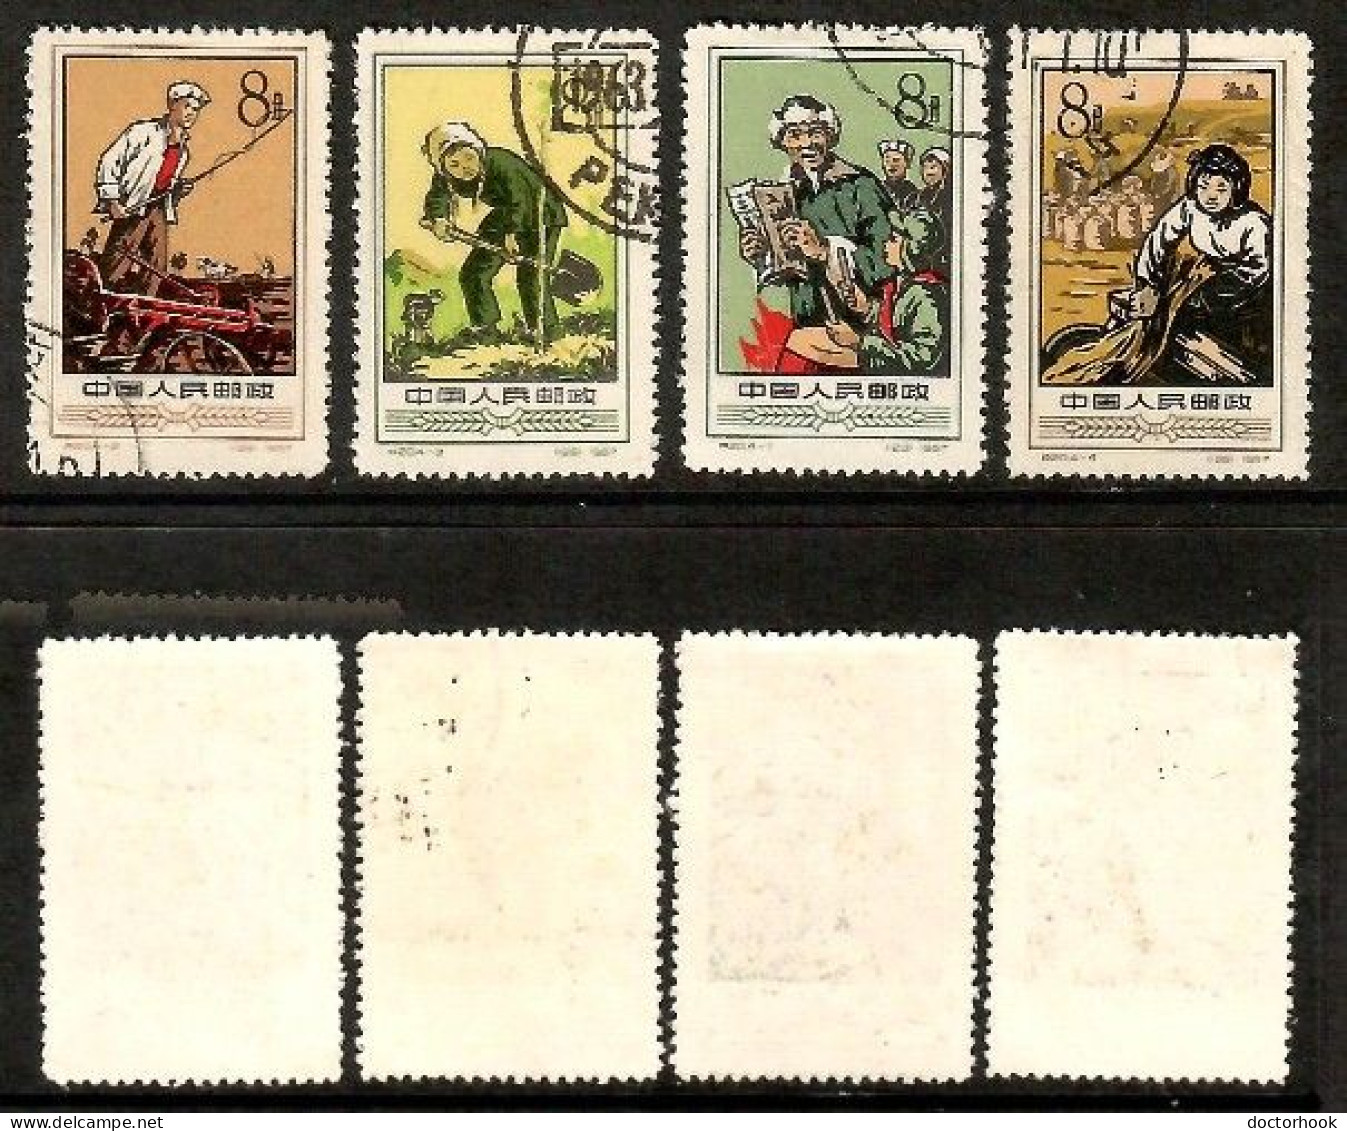 PEOPLES REPUBLIC Of CHINA   Scott # 330-3 USED (CONDITION AS PER SCAN) (Stamp Scan # 1005-9) - Used Stamps